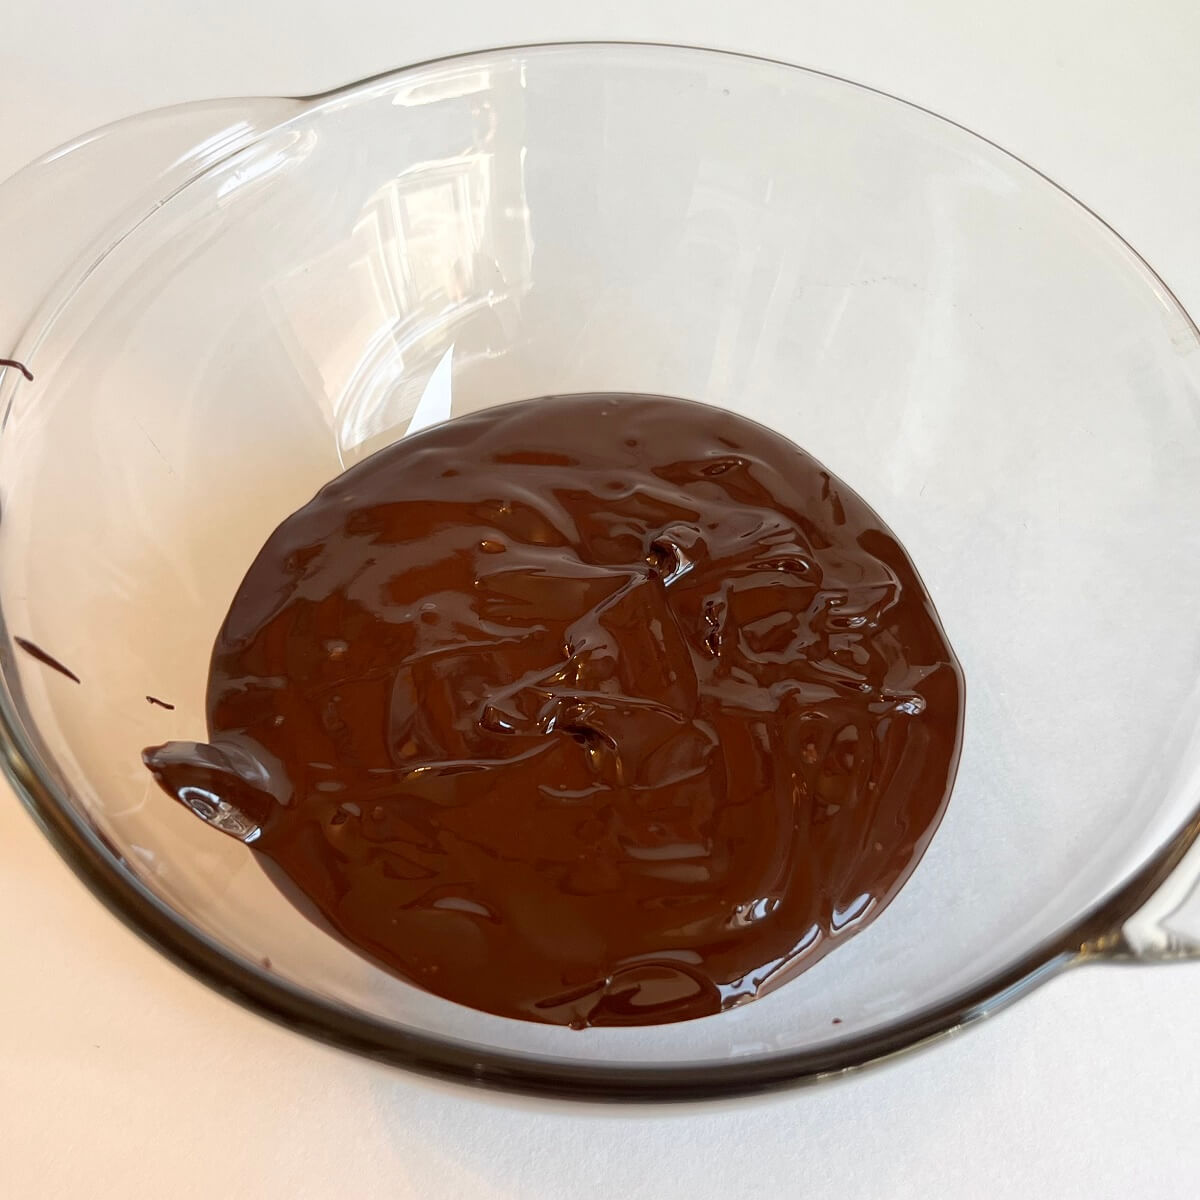 Warm melted dark chocolate in a glass bowl.